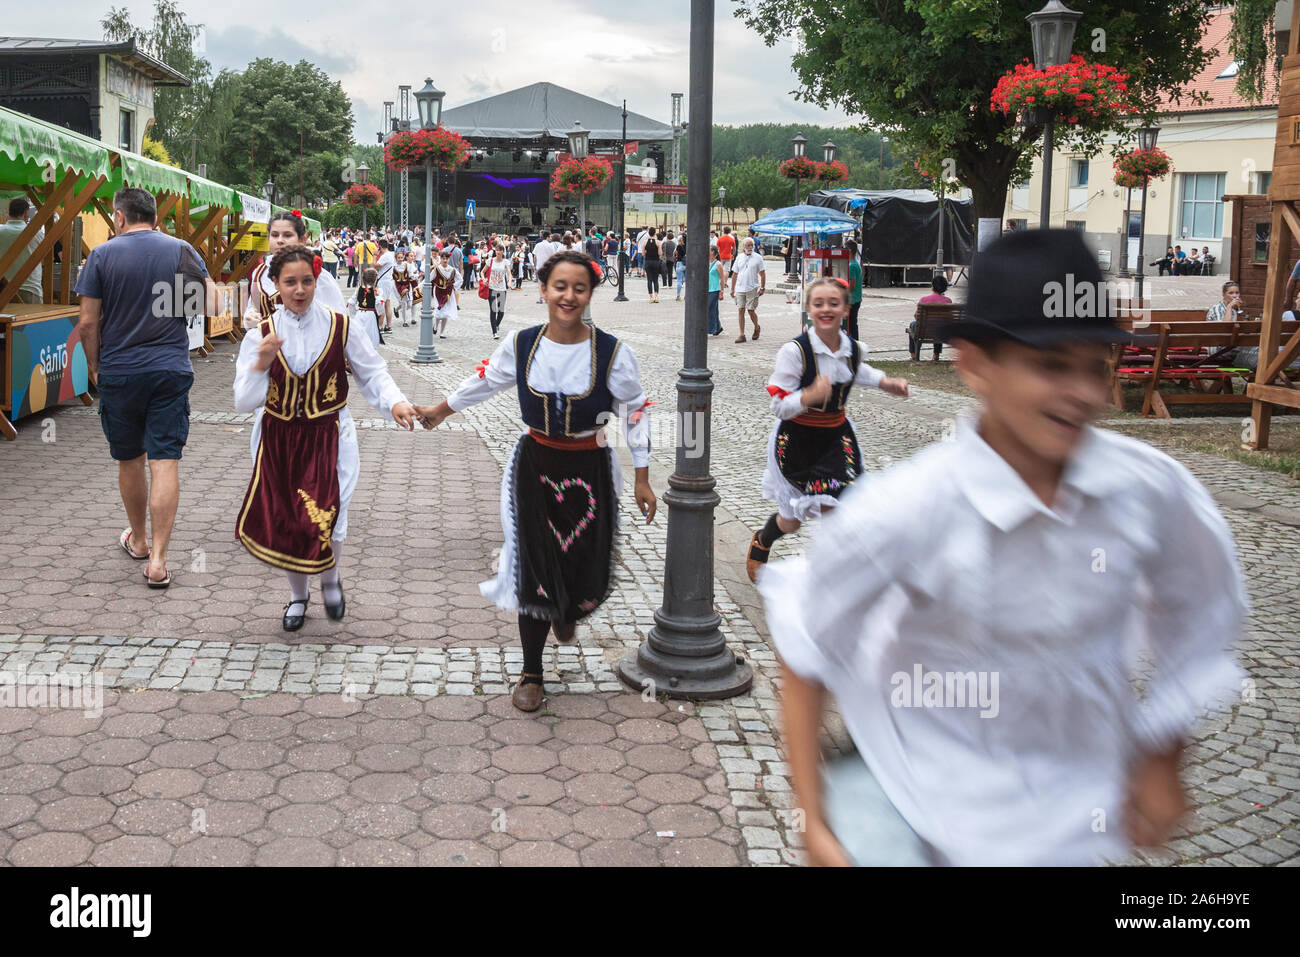 PANCEVO, SERBIA - JUNE 9, 2018: Serbian children wearing traditional folkloric costumes of Serbia with typical dresses for girls and peasant clothing Stock Photo